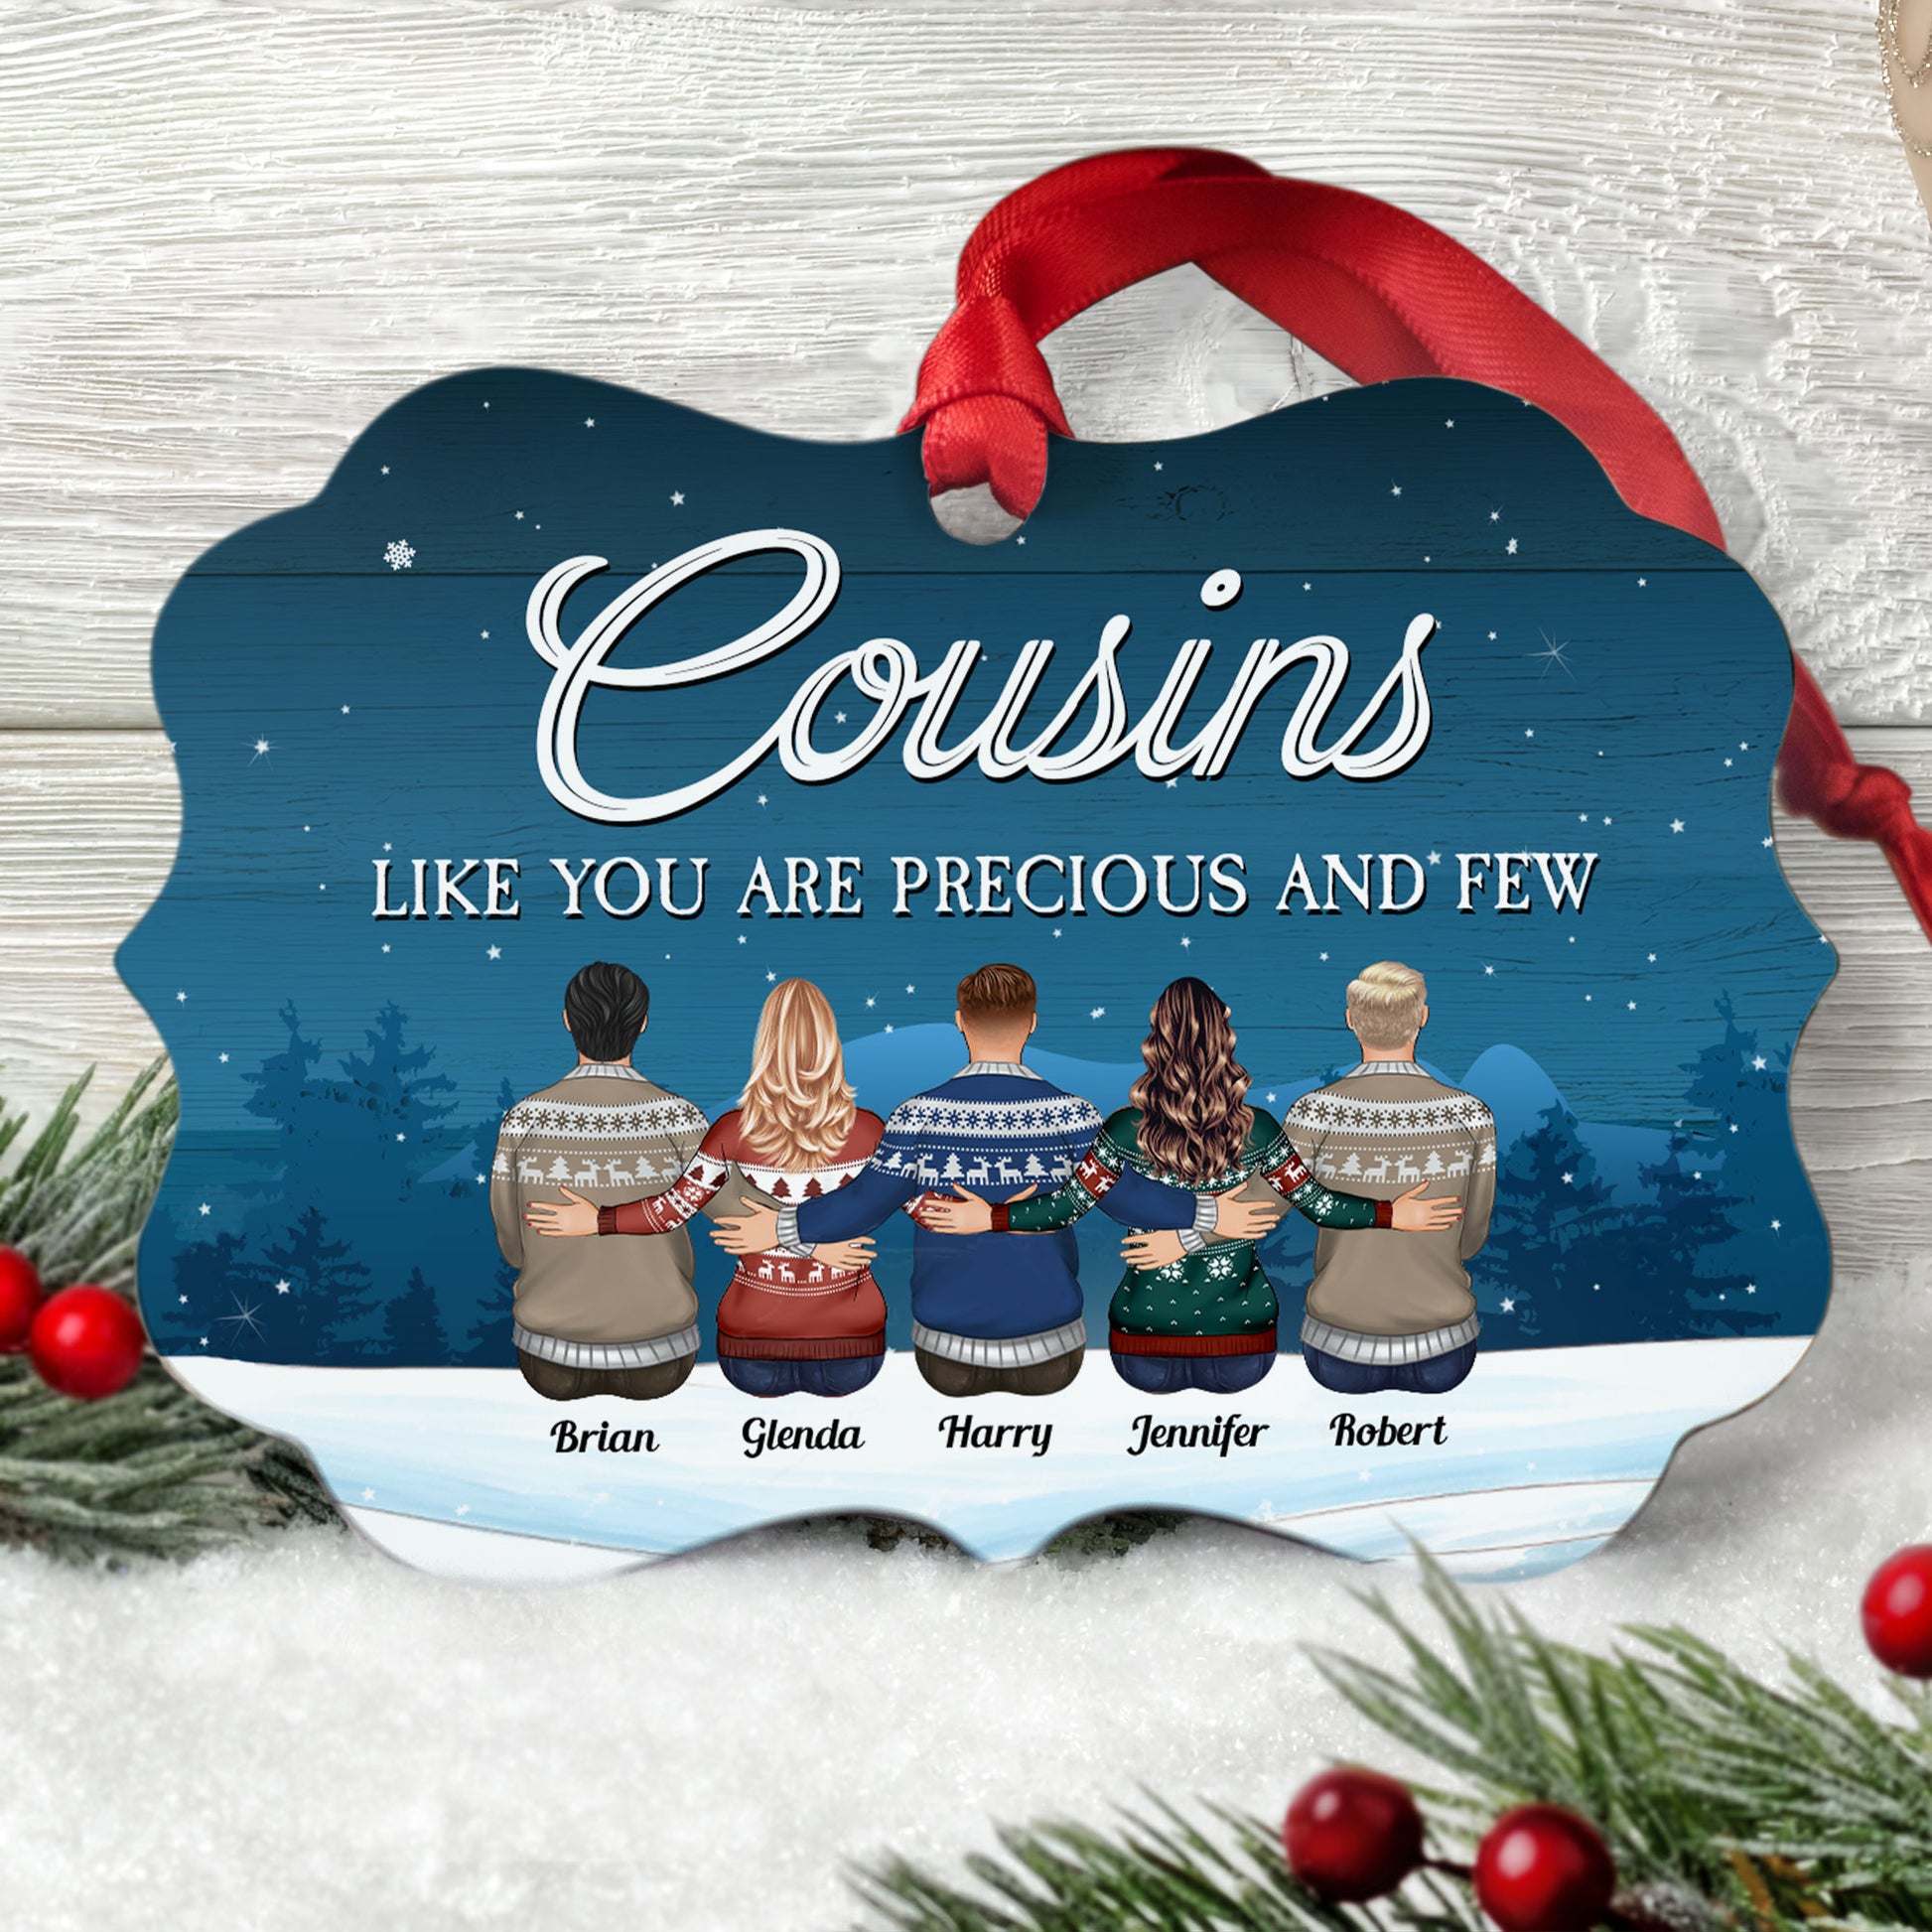 Cousins Like You Are Precious And Few - Personalized Aluminum Ornament - Christmas Gift For Cousins, Gift For Aunts, Gift For Uncles, Gift For Family - Family Hugging